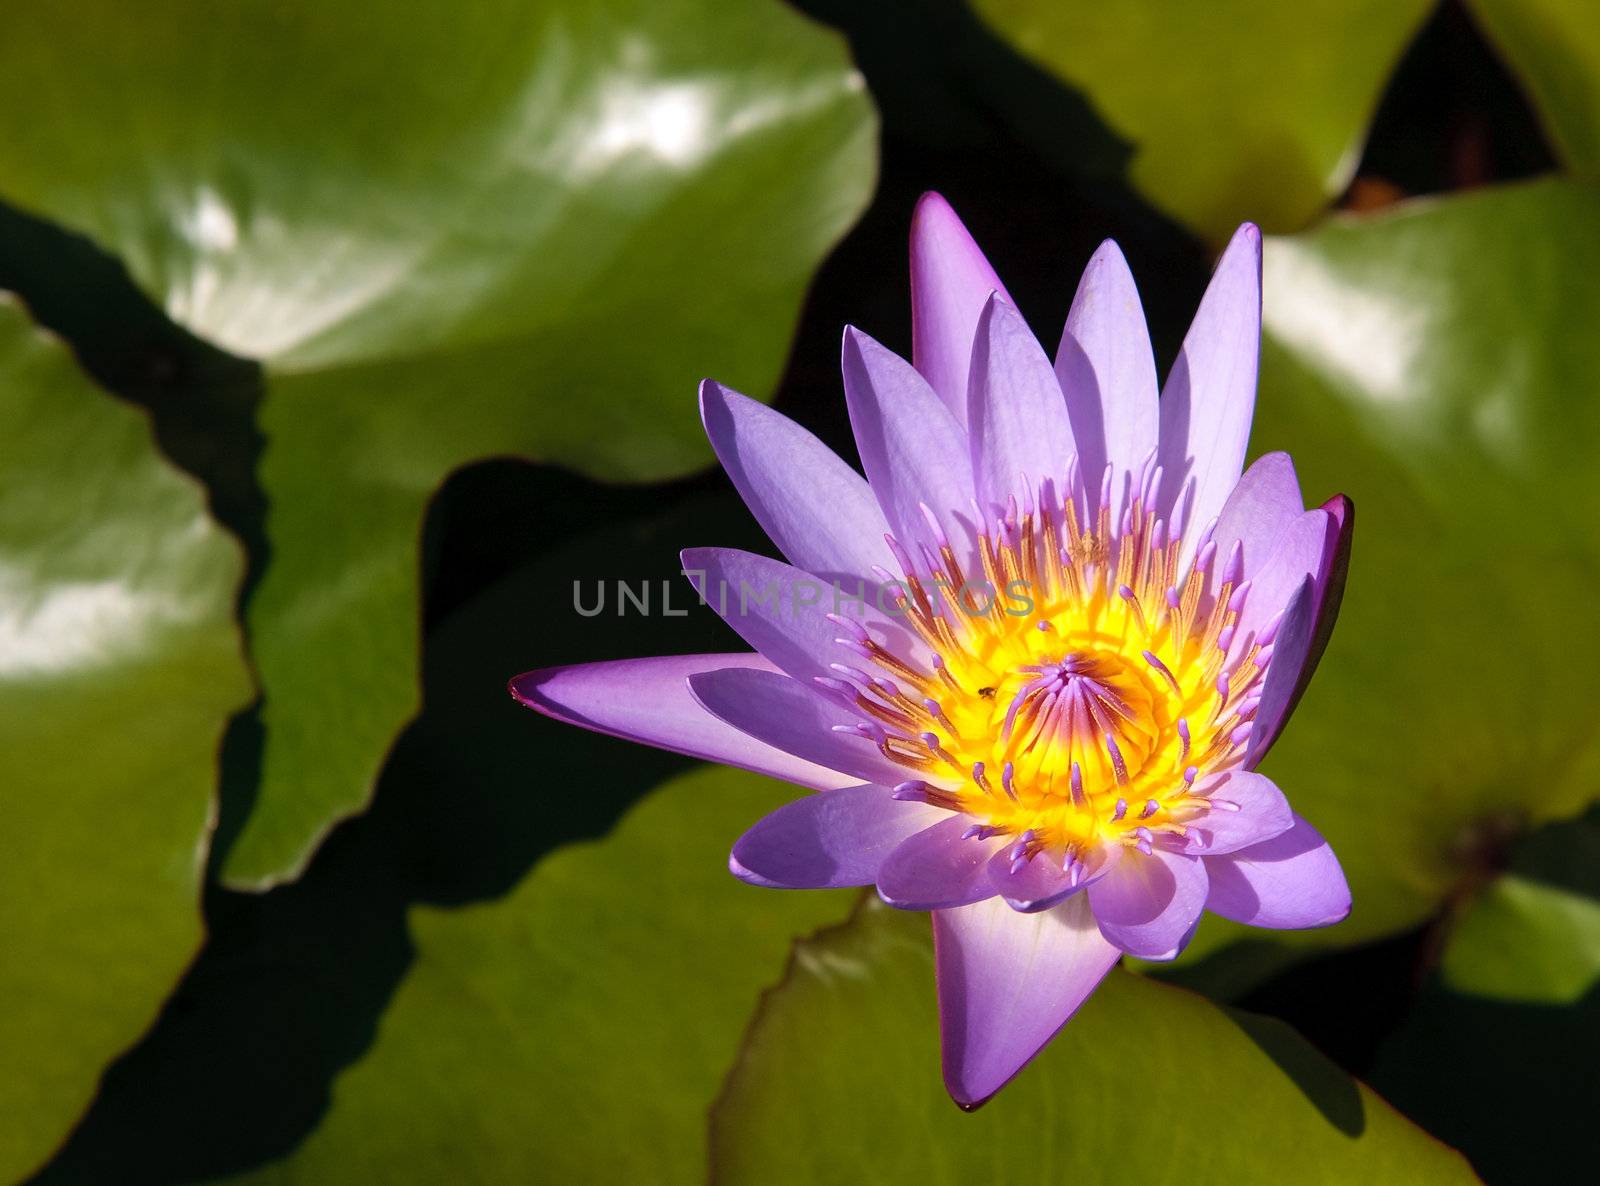 Close up of purple/violet water lily with surrounding green leaves